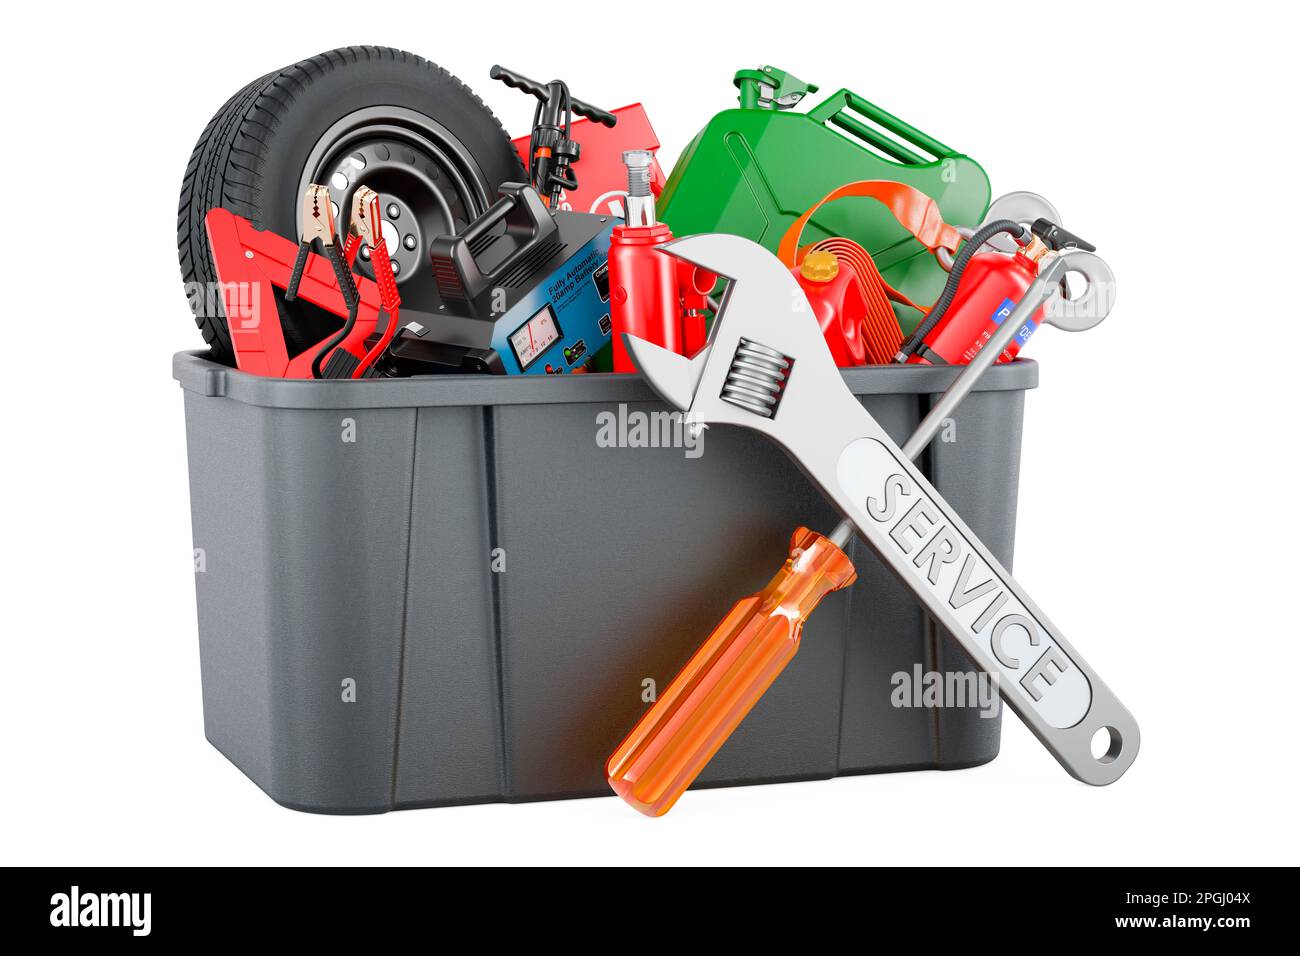 Plastic box full of car tools, equipment and accessories with